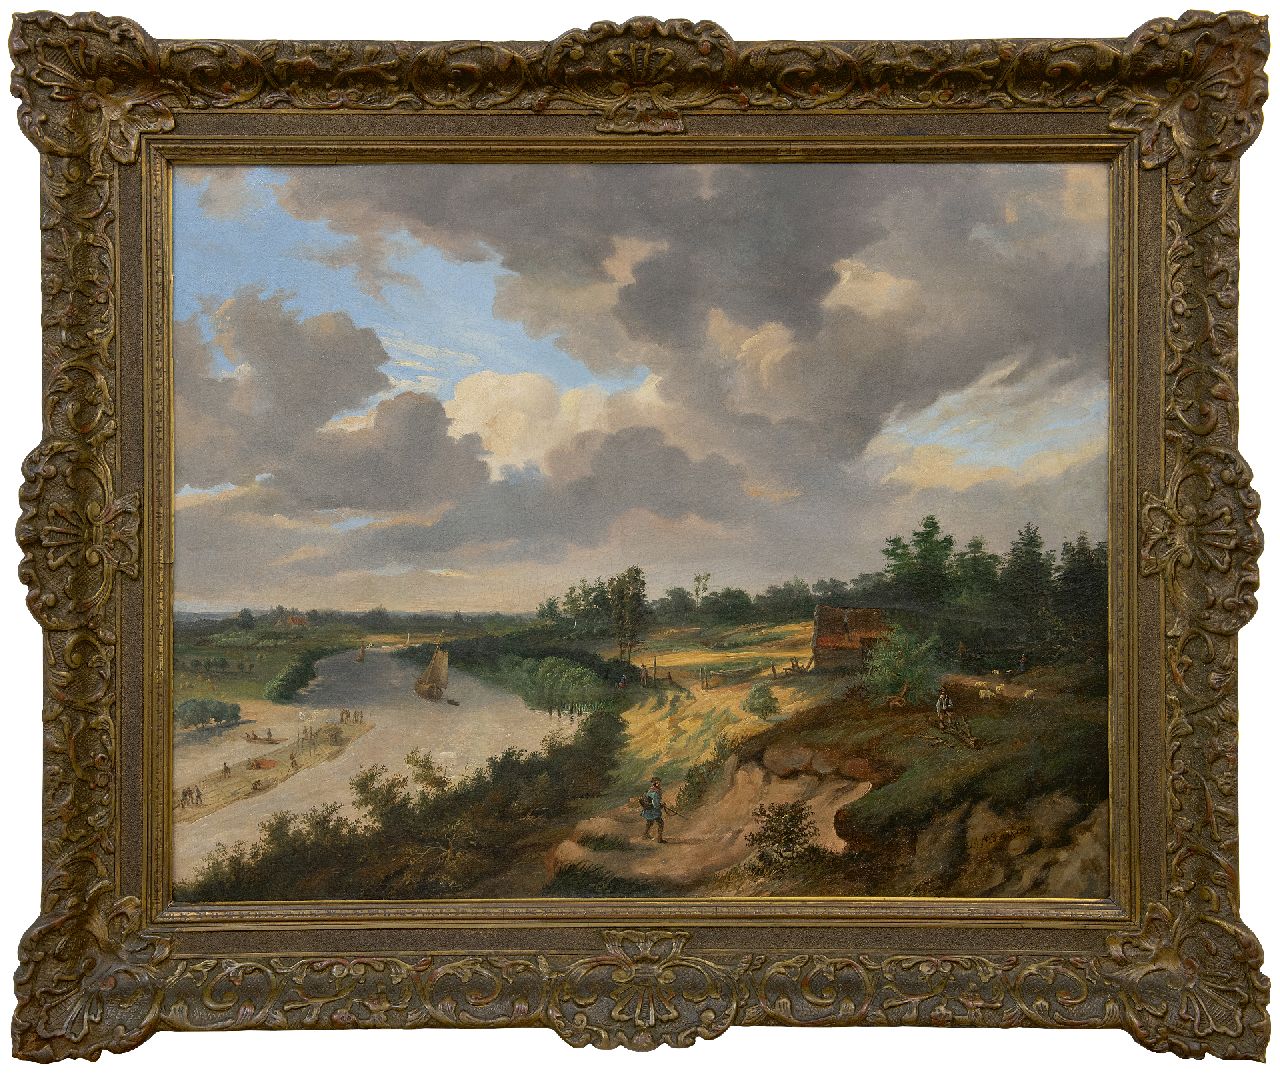 Braak L.R. van den | Leonardus Raphael van den Braak | Paintings offered for sale | A wood transport on the Rhine, oil on canvas 63.0 x 80.0 cm, signed l.r. and dated 1857